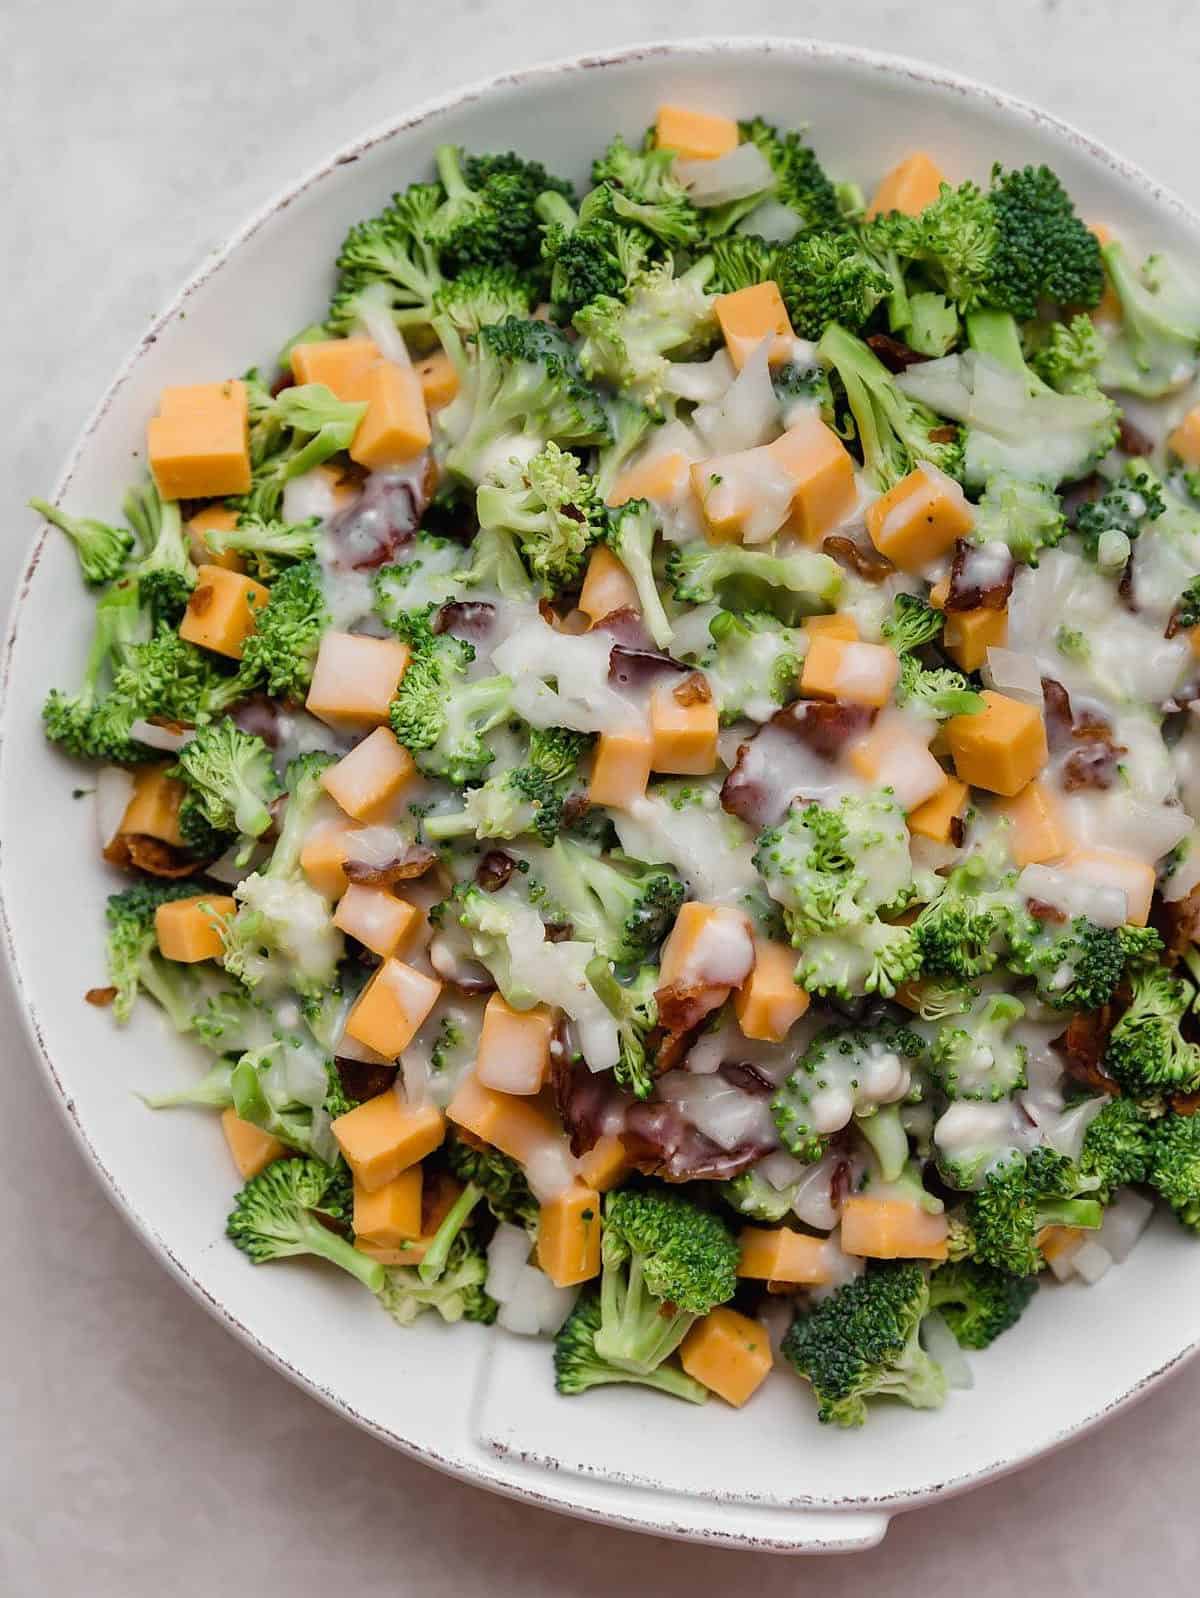  This salad is the perfect way to enjoy broccoli without sacrificing taste.